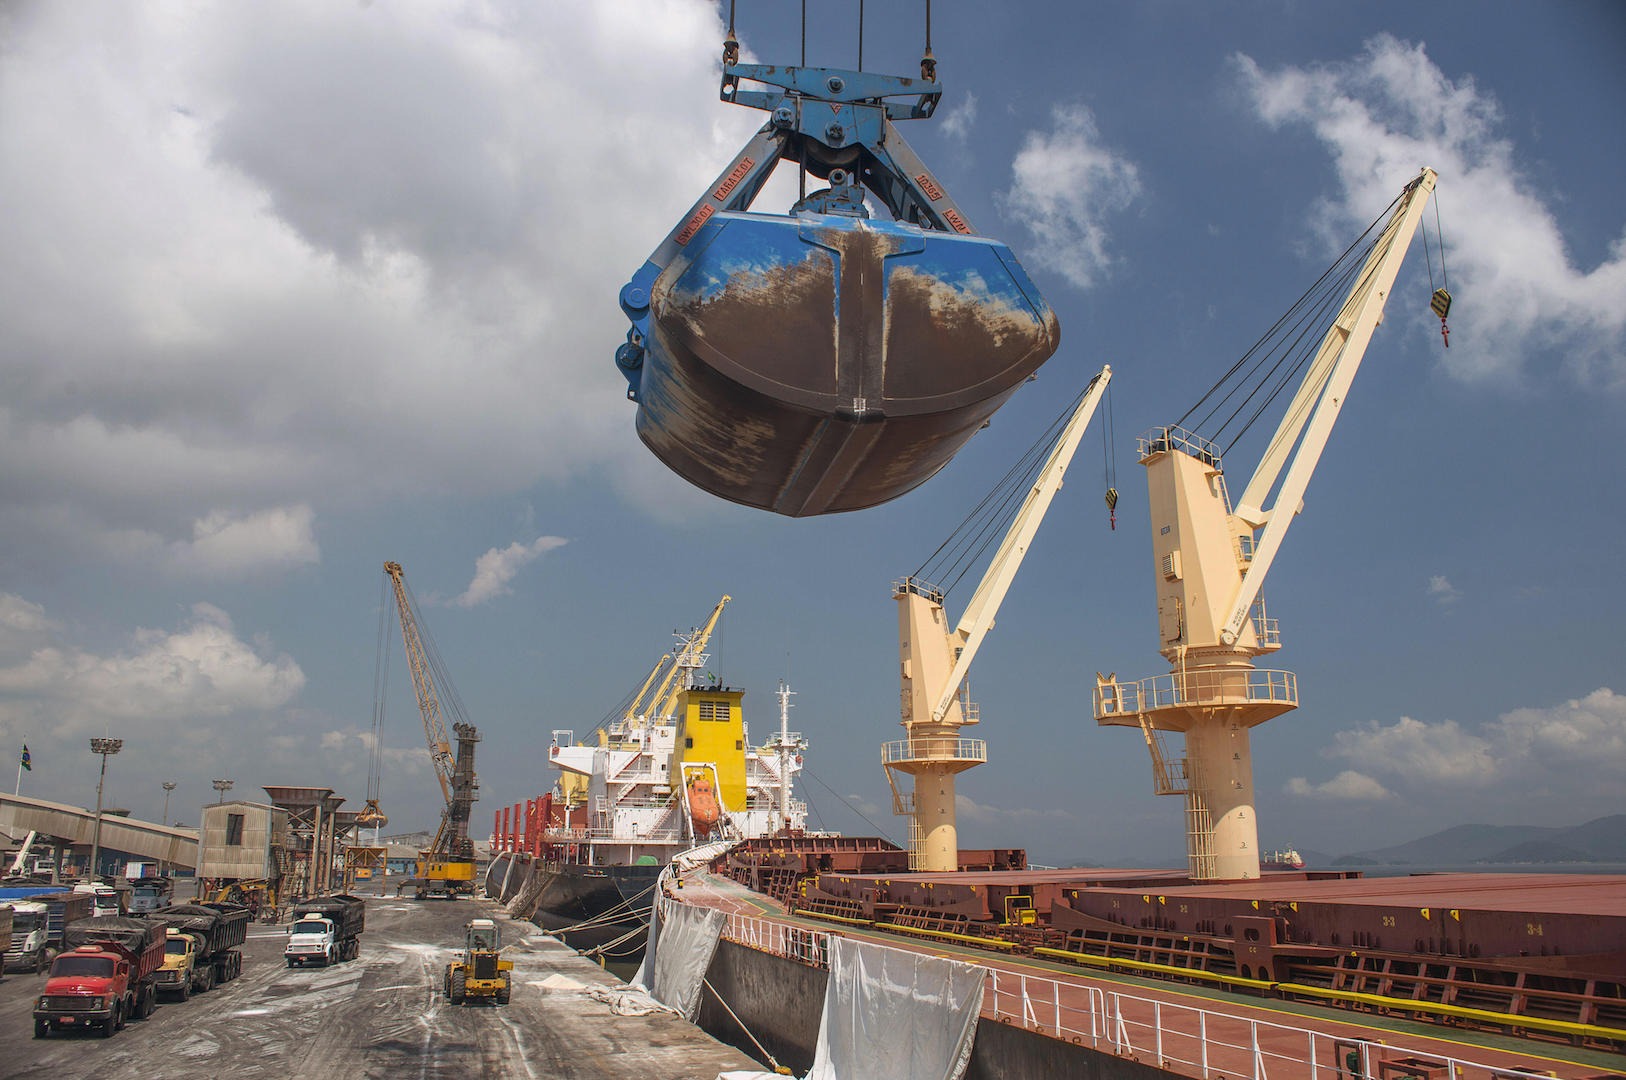 <p>A crane unloads fertiliser at the port of Paranaguá, Southern Brazil. Chinese investors are supporting the China-South America trade with investments across the supply chain (image: Alamy)</p>